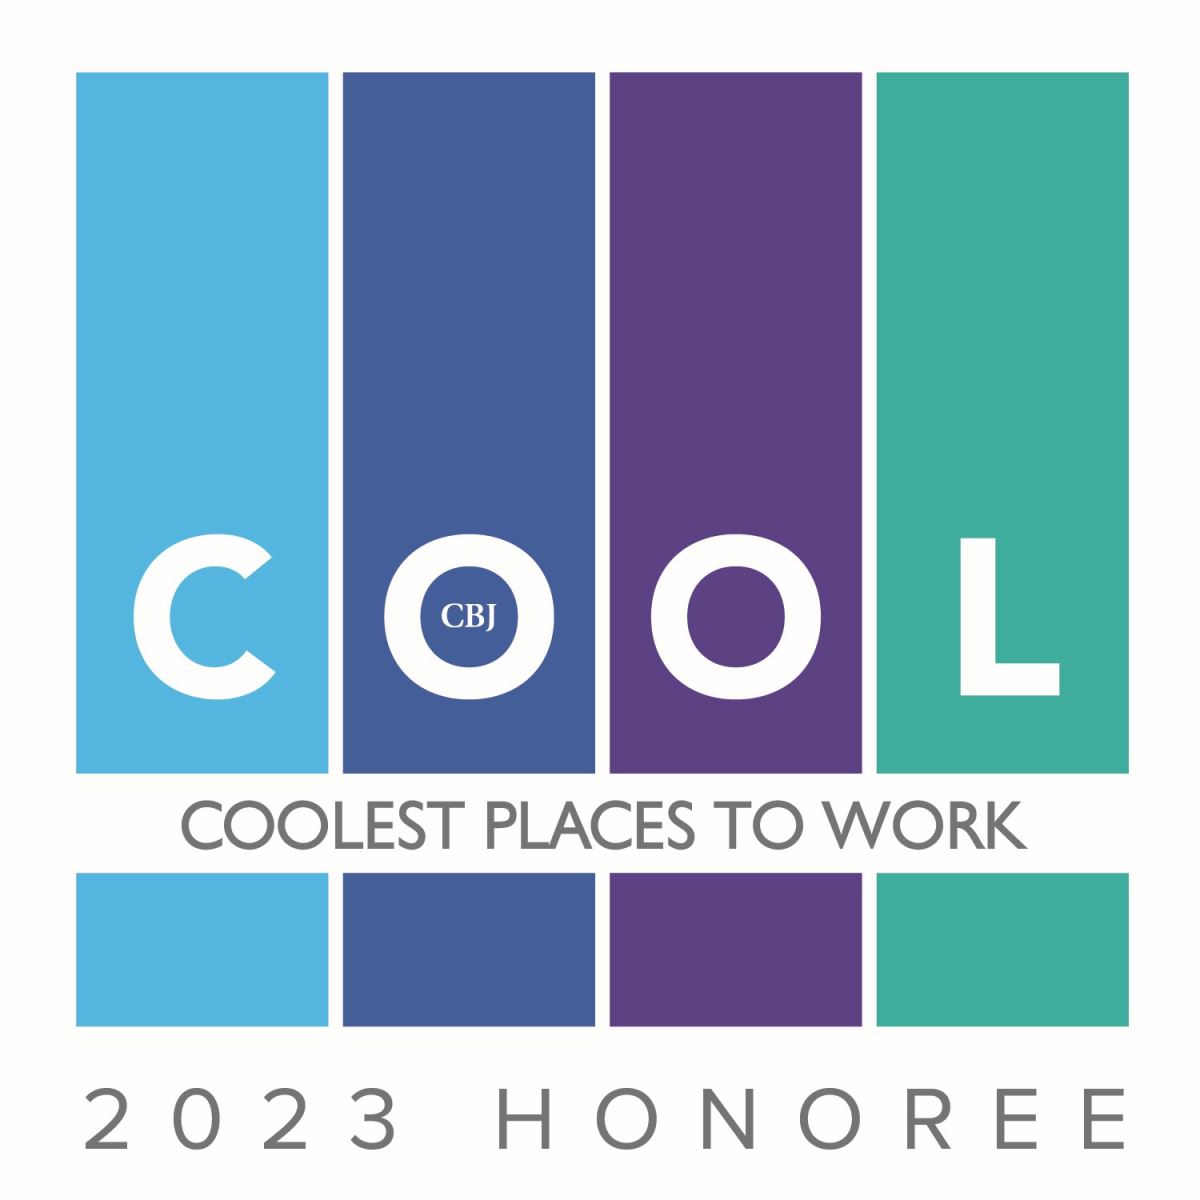 CBJ Coolest Places to Work Honoree